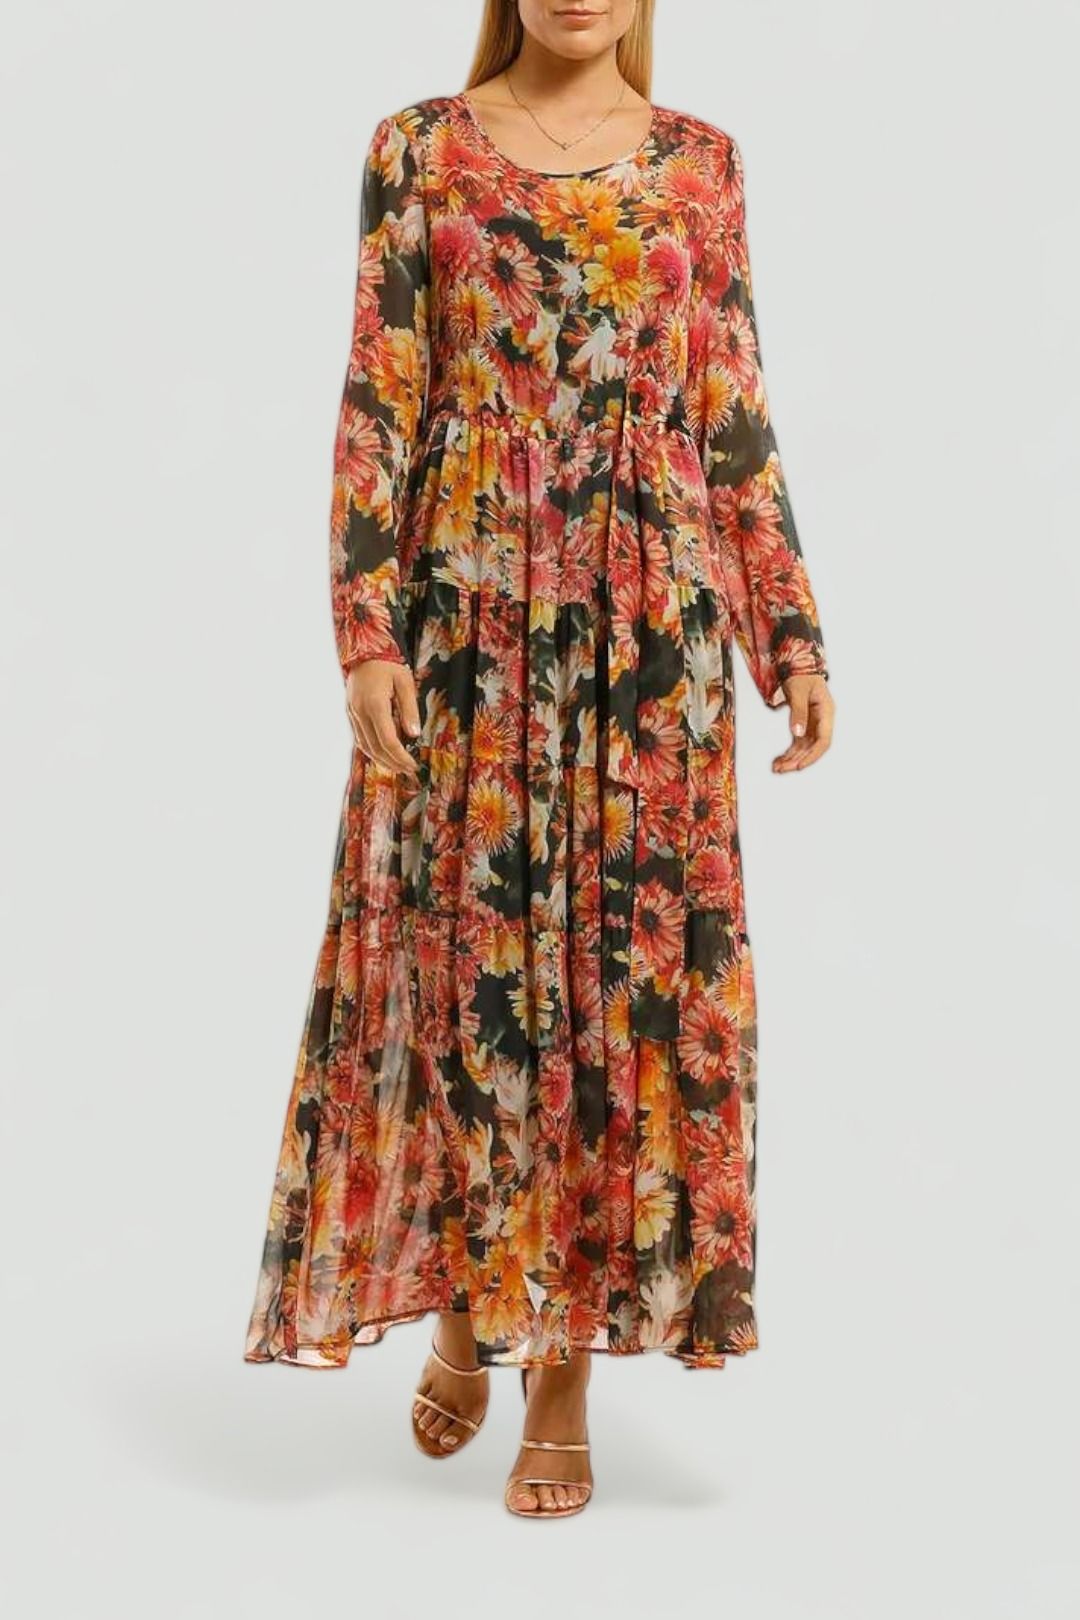 Curate-by-Trelise-Cooper-Dont-Get-Me-Long-Dress-Flower-Front